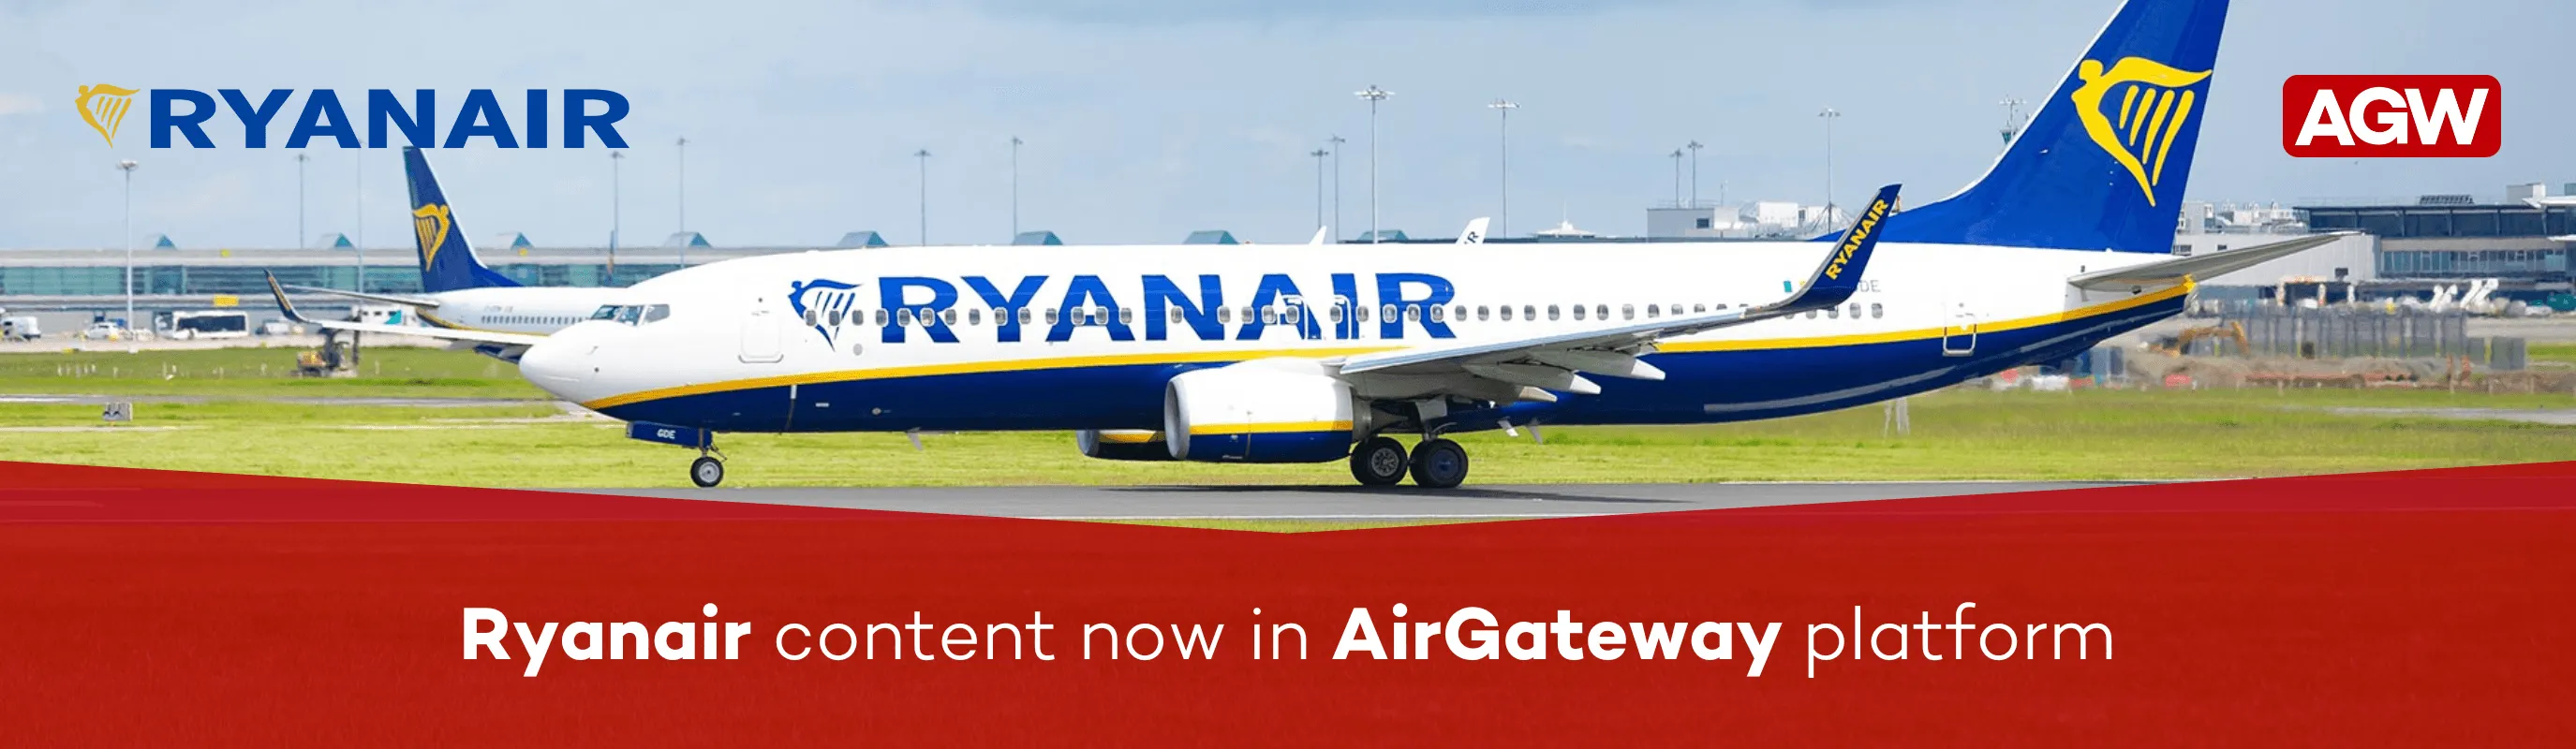 Ryanair content now available on AirGateway, facilitated by Kyte